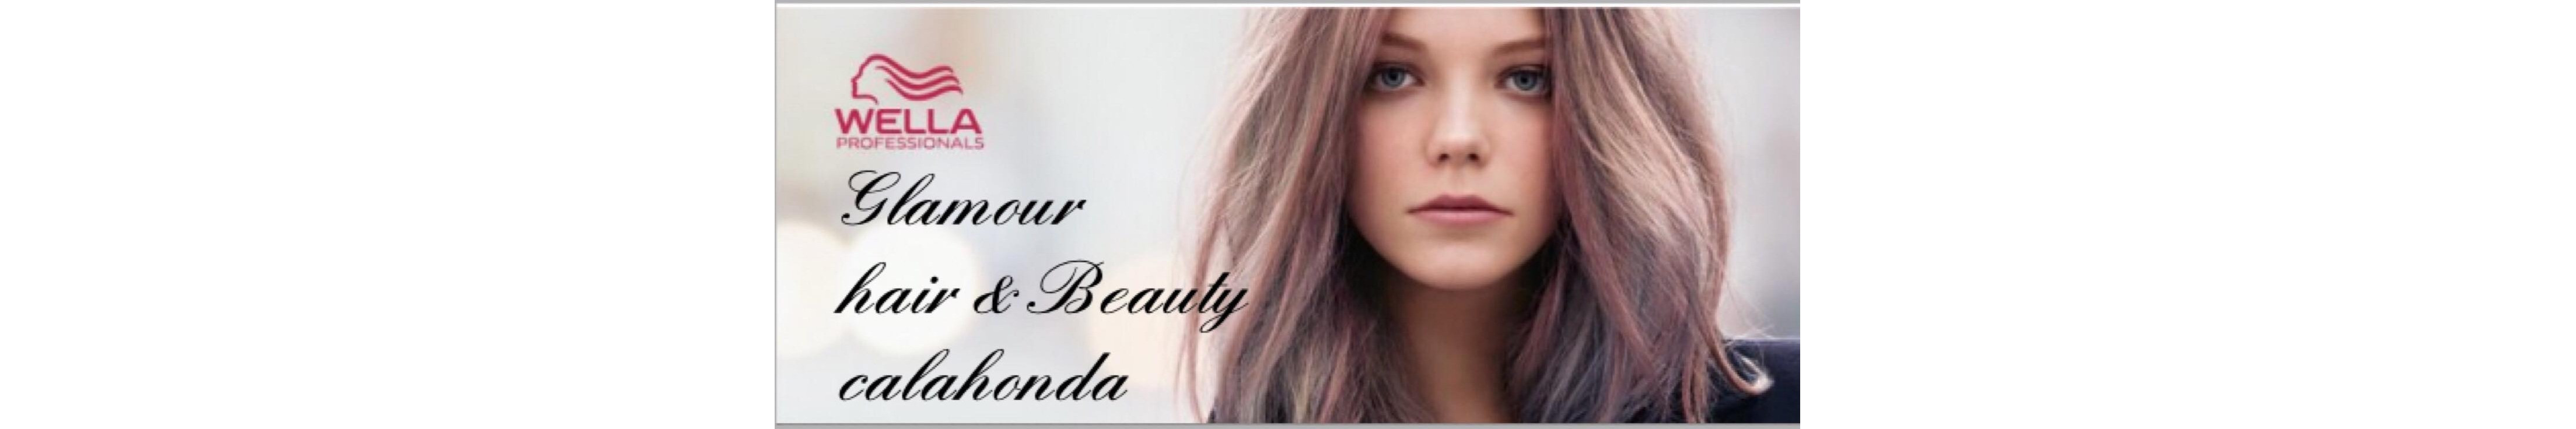 Professional Stylists and beauty technicians in Calahonda